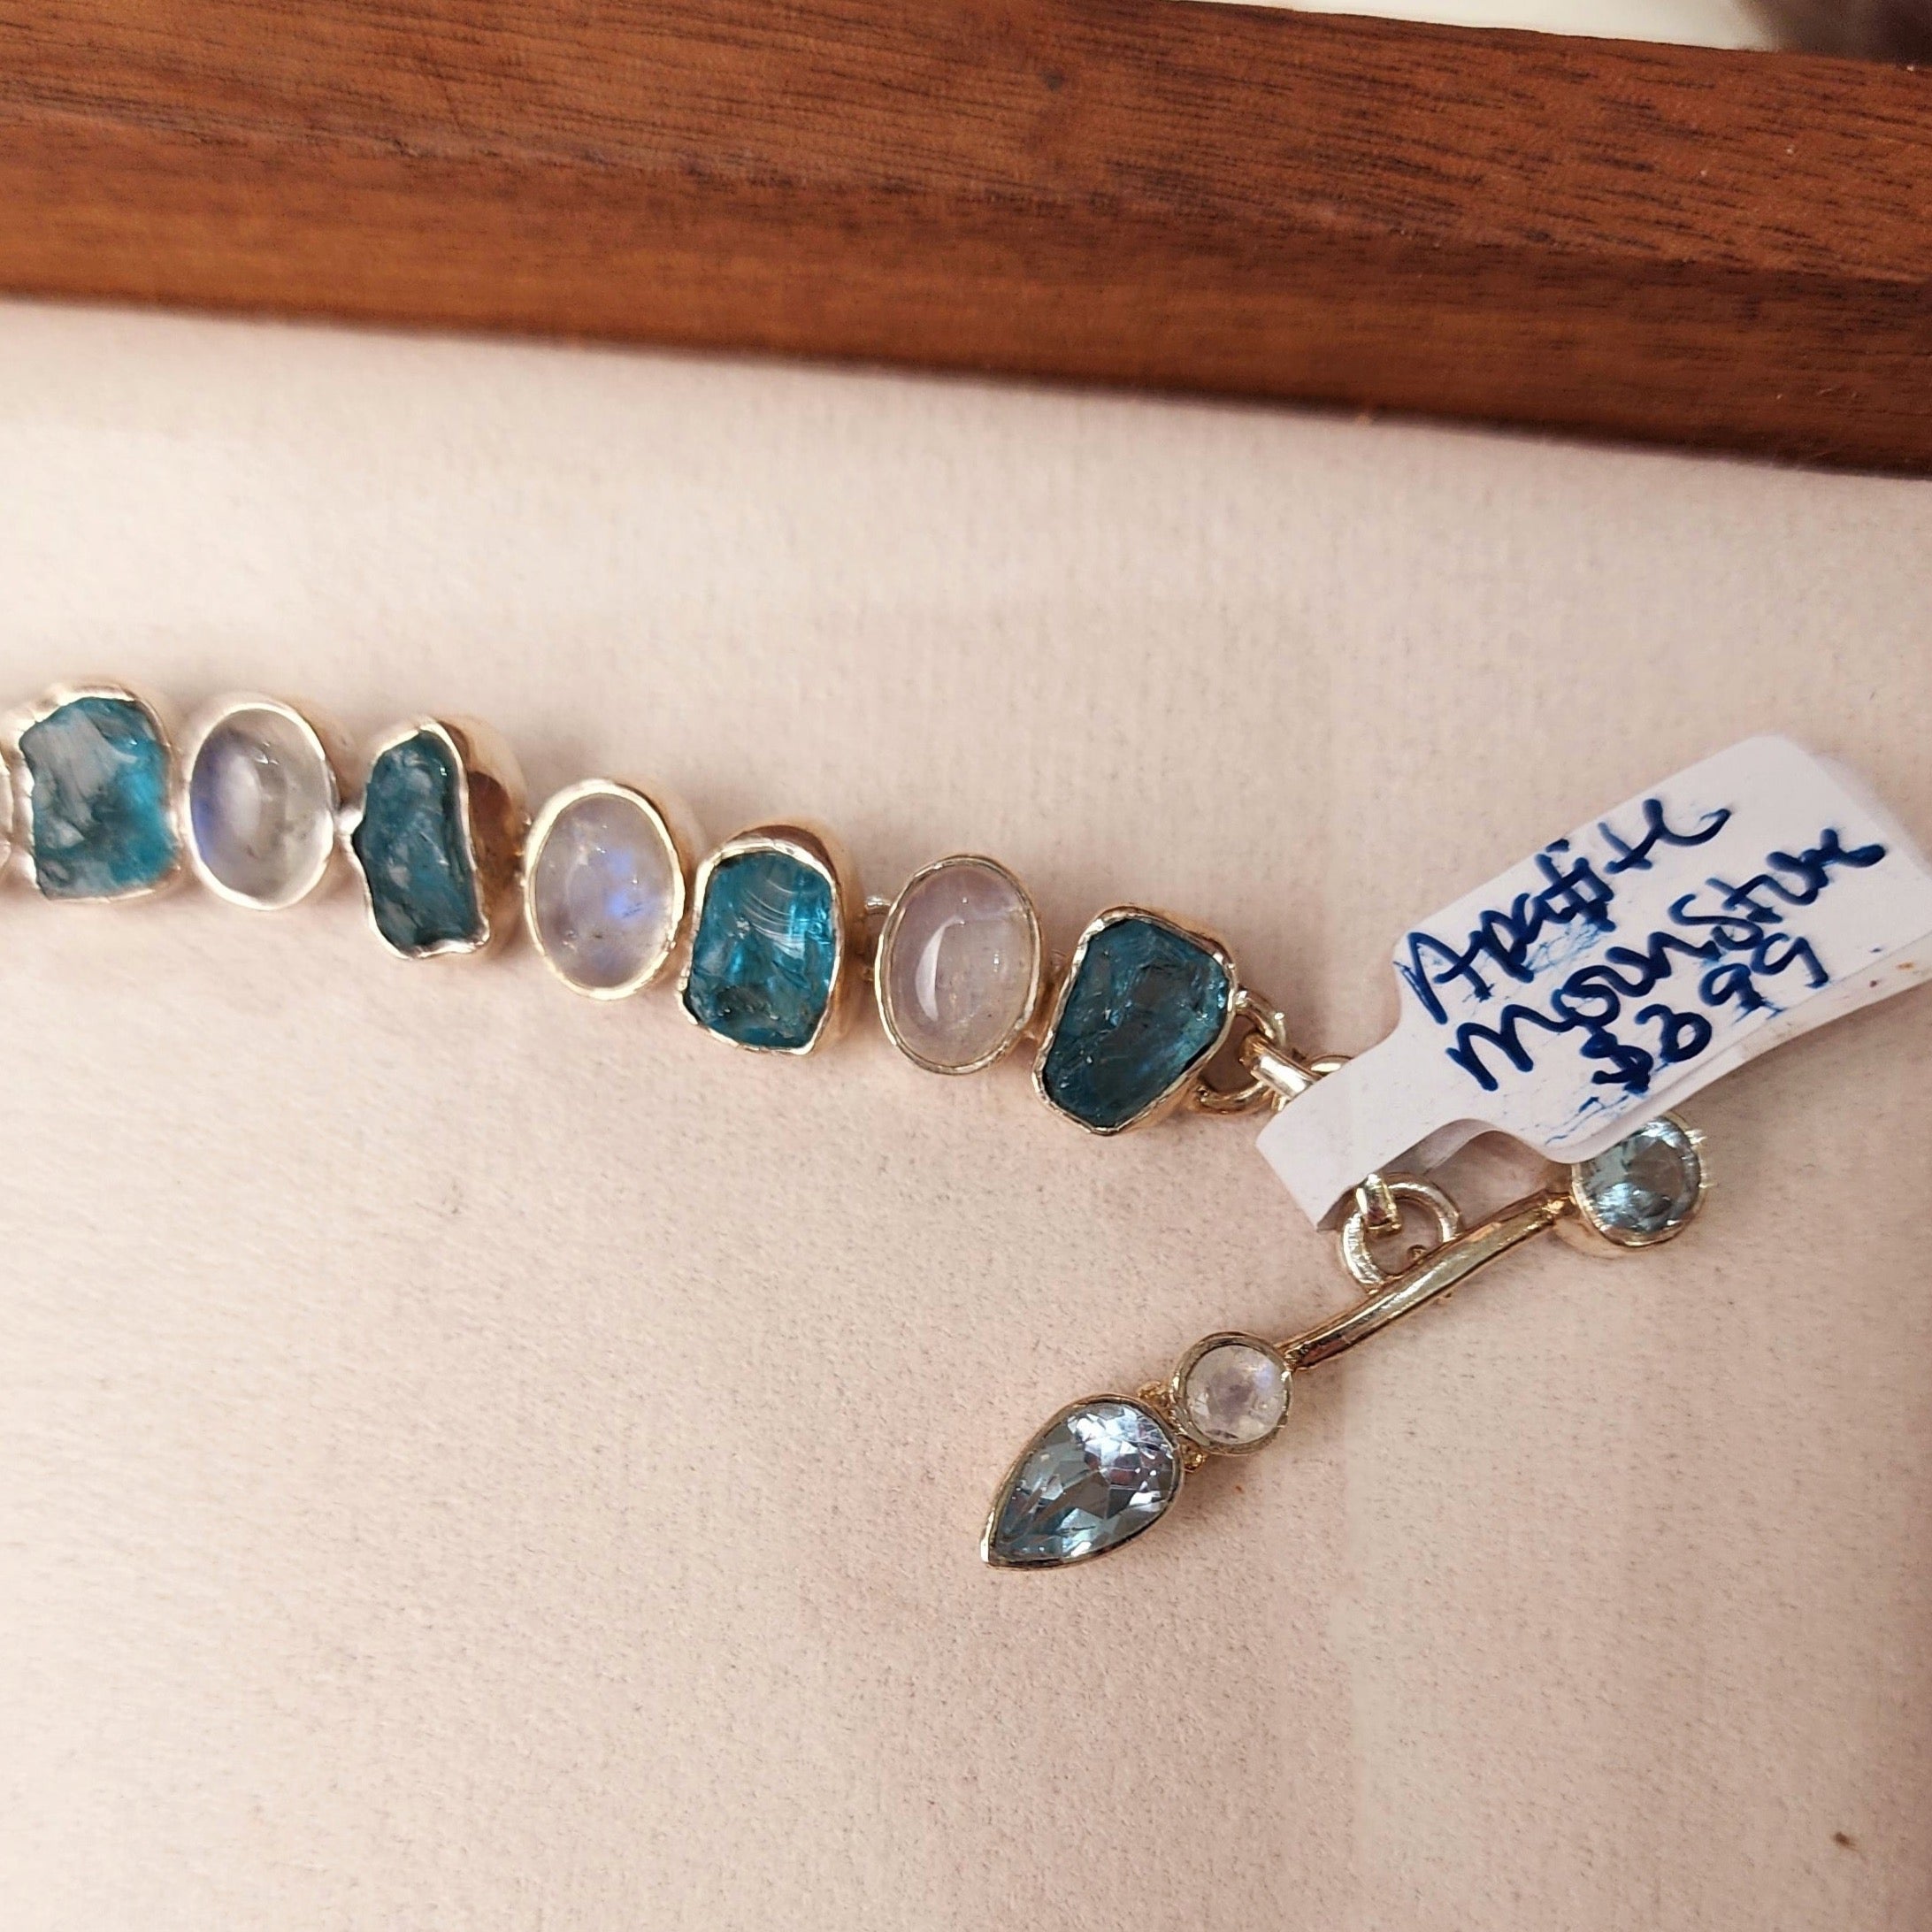 Paraíba Blue Apatite with Rainbow Moonstone Bracelet .925 Silver for Starting Fresh and Healthy Choices